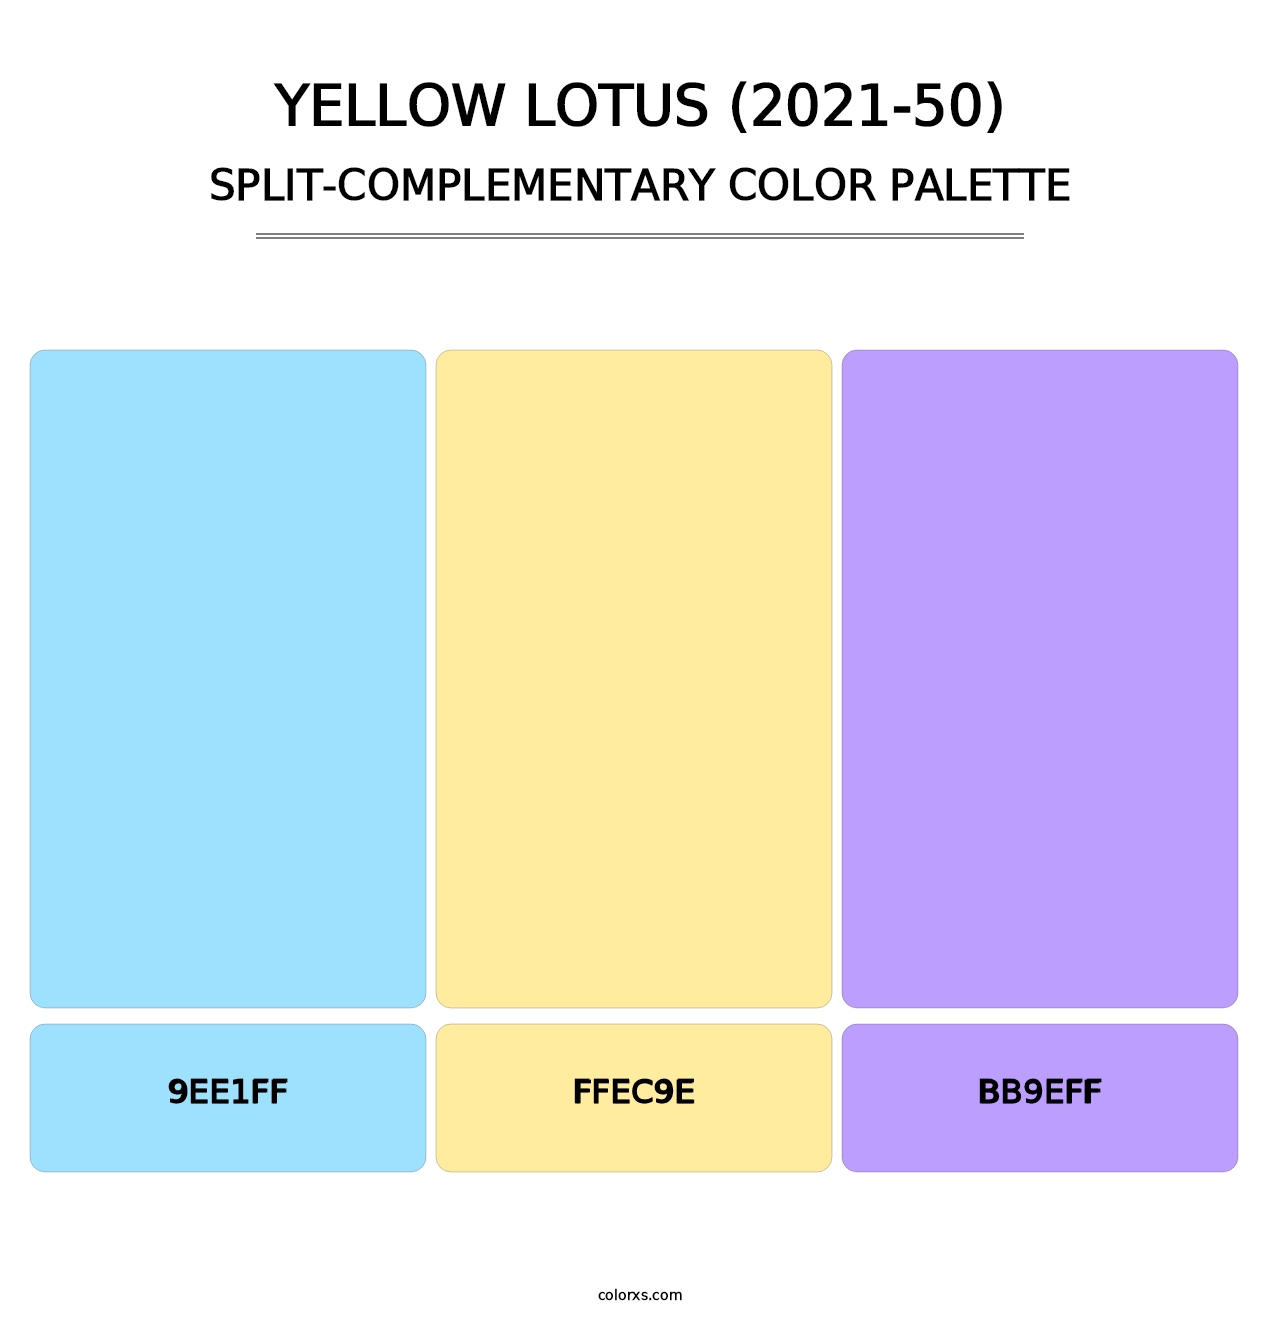 Yellow Lotus (2021-50) - Split-Complementary Color Palette